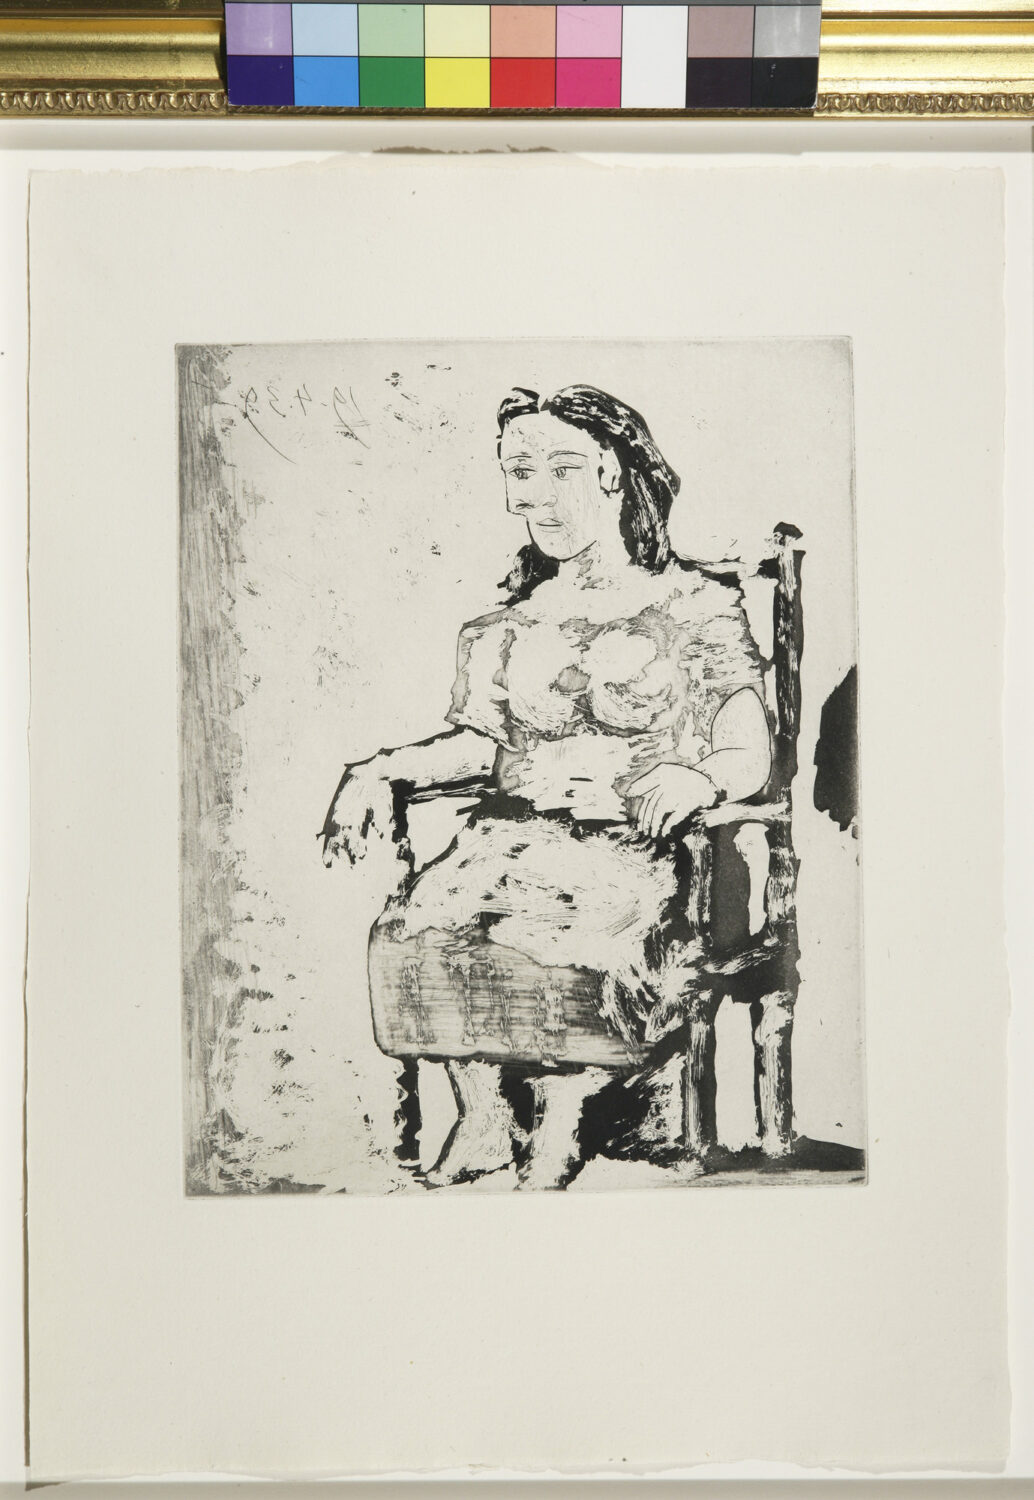 thumbnail of Aquatint, scraper and engraving by Pablo Picasso titled Femme au Fauteul: Dora MaarPablo Picasso.